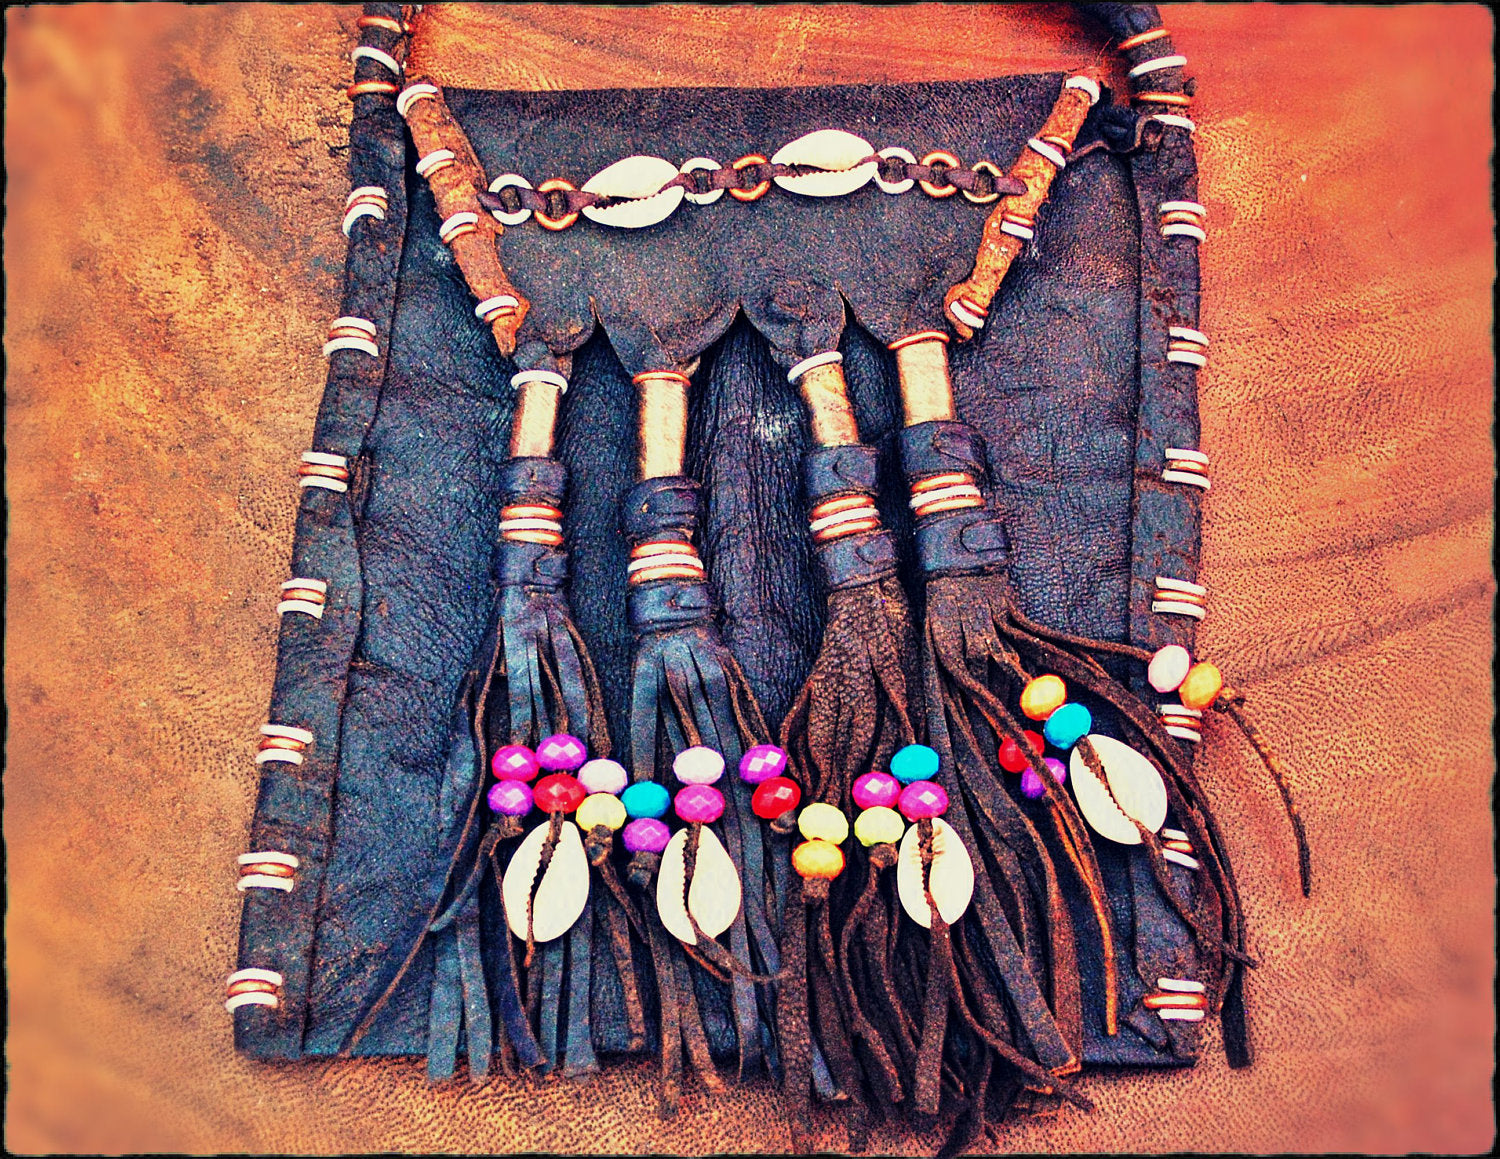 Wodaabe Leather Bag with Cowrie Shells - Fulani Leather Bag from Mali - Tribal Leather Bag - African Leather Pouch